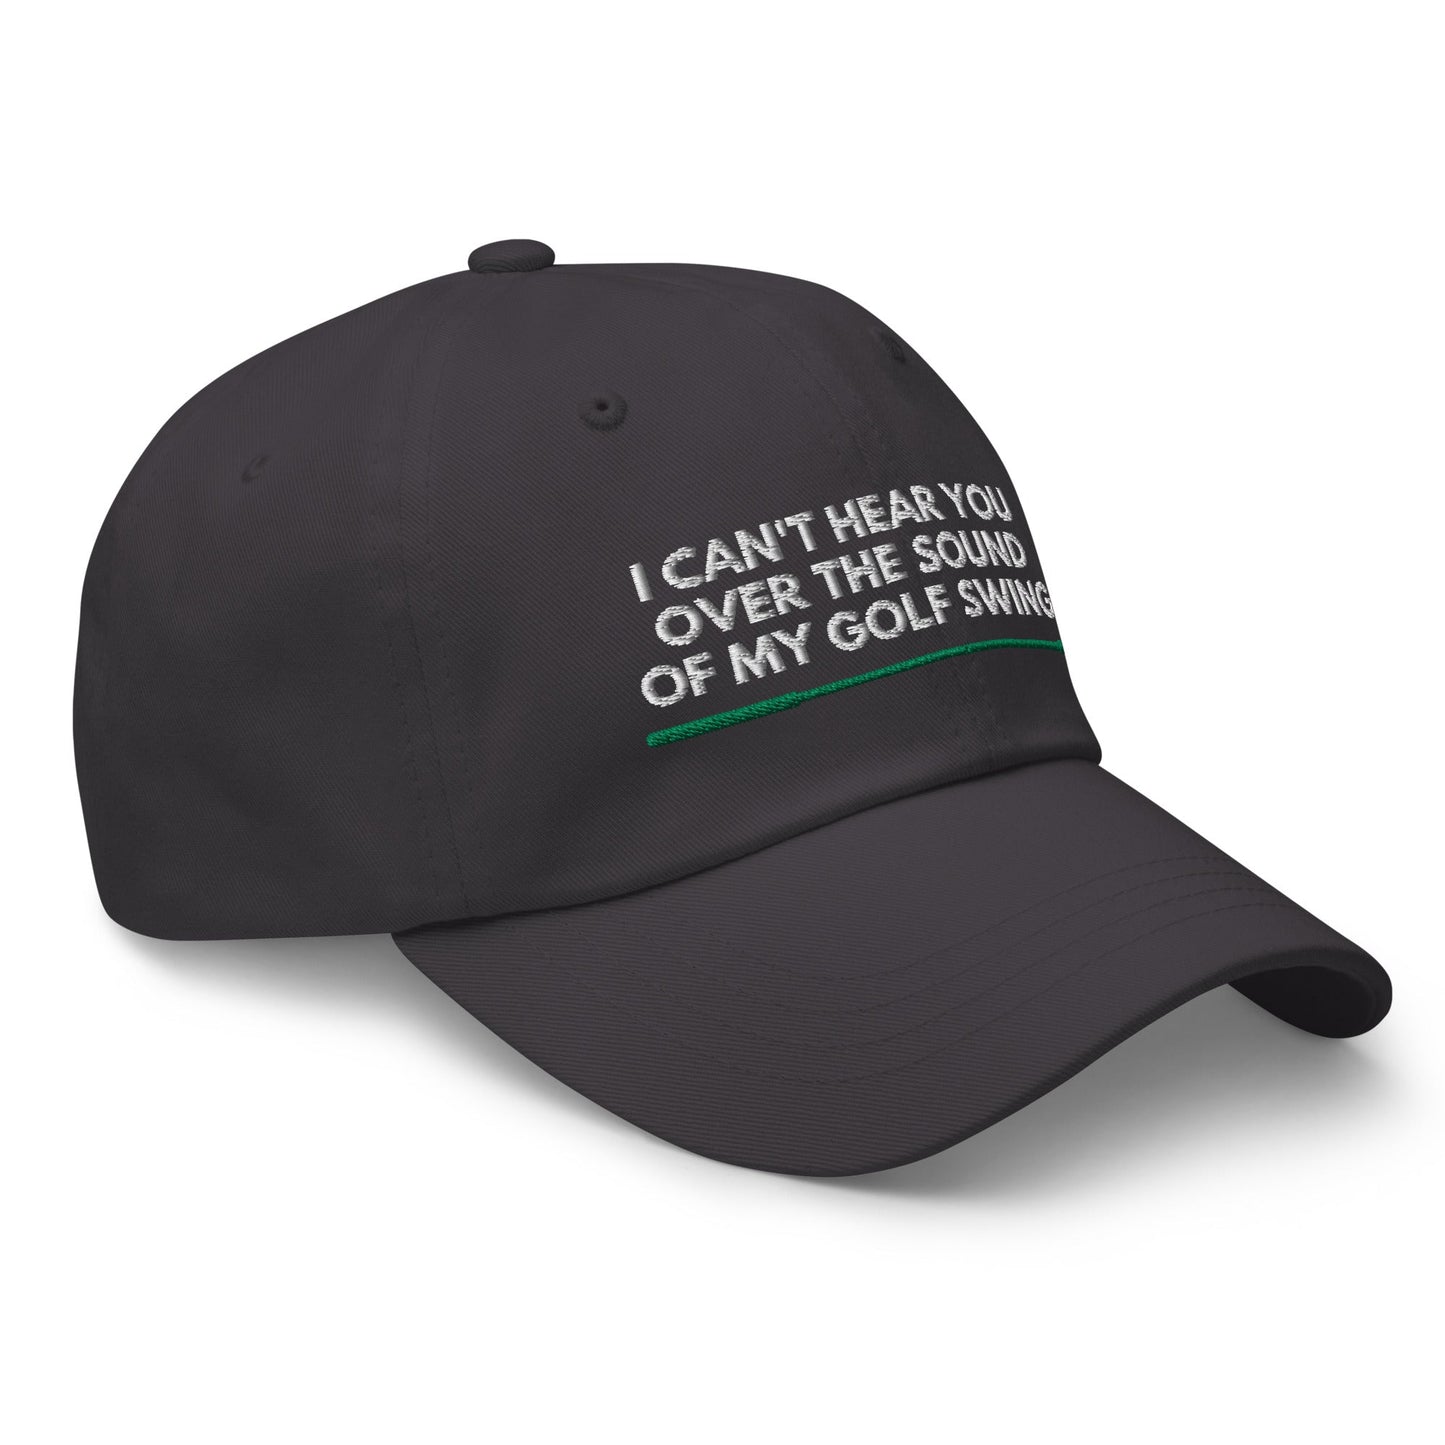 Funny Golfer Gifts  Dad Cap Dark Grey I Cant Hear You Over The Sound Of My Golf Swing Hat Cap